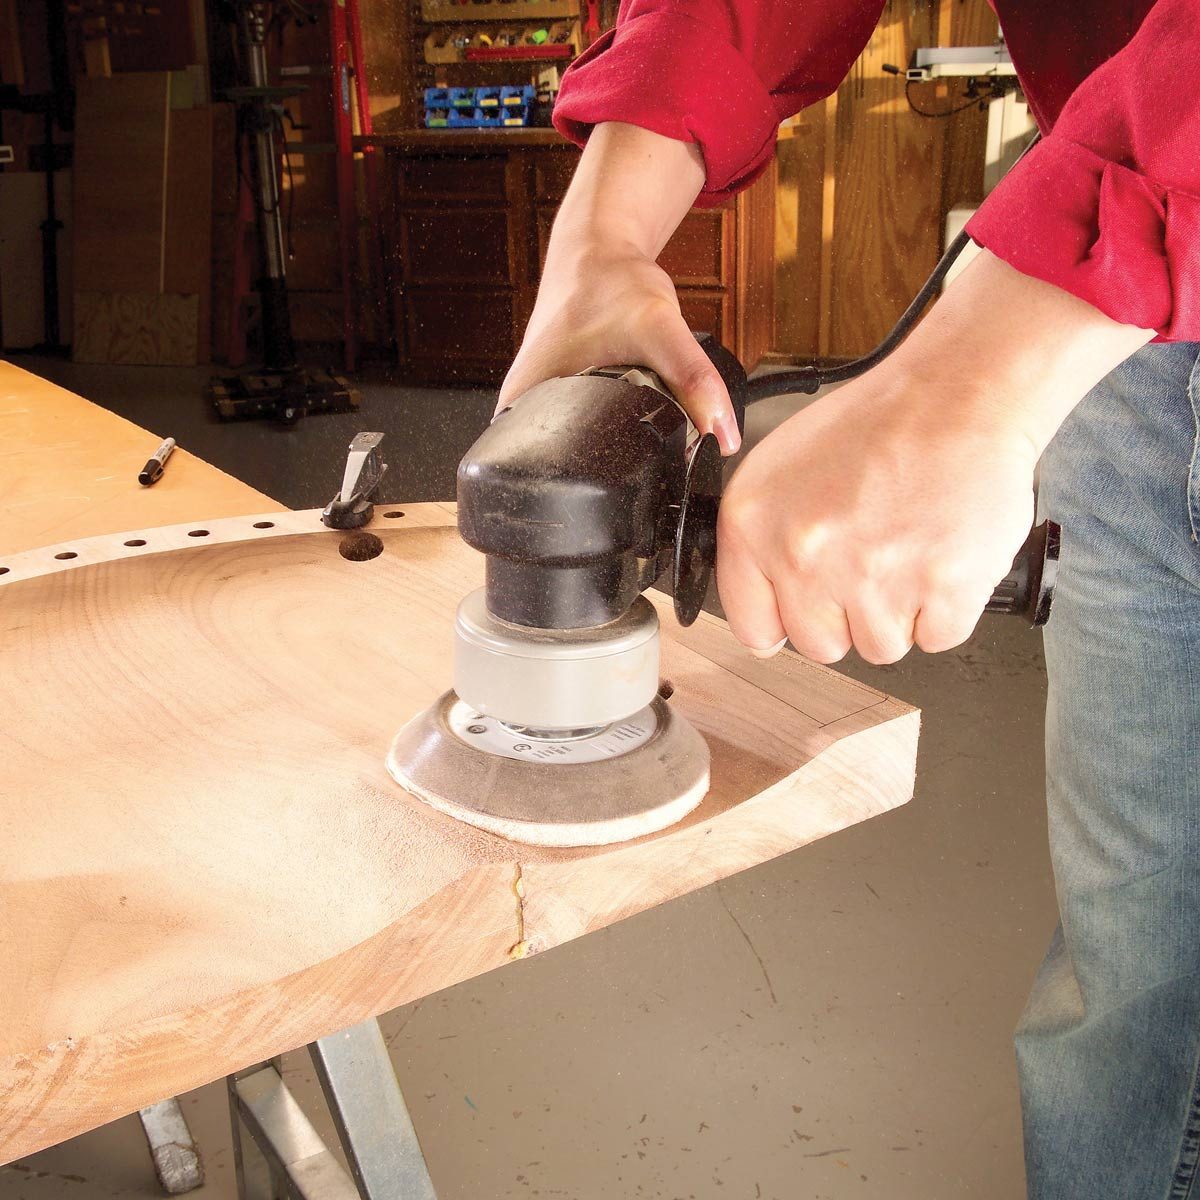 Recommended Sanding Equipment - Turn A Wood Bowl